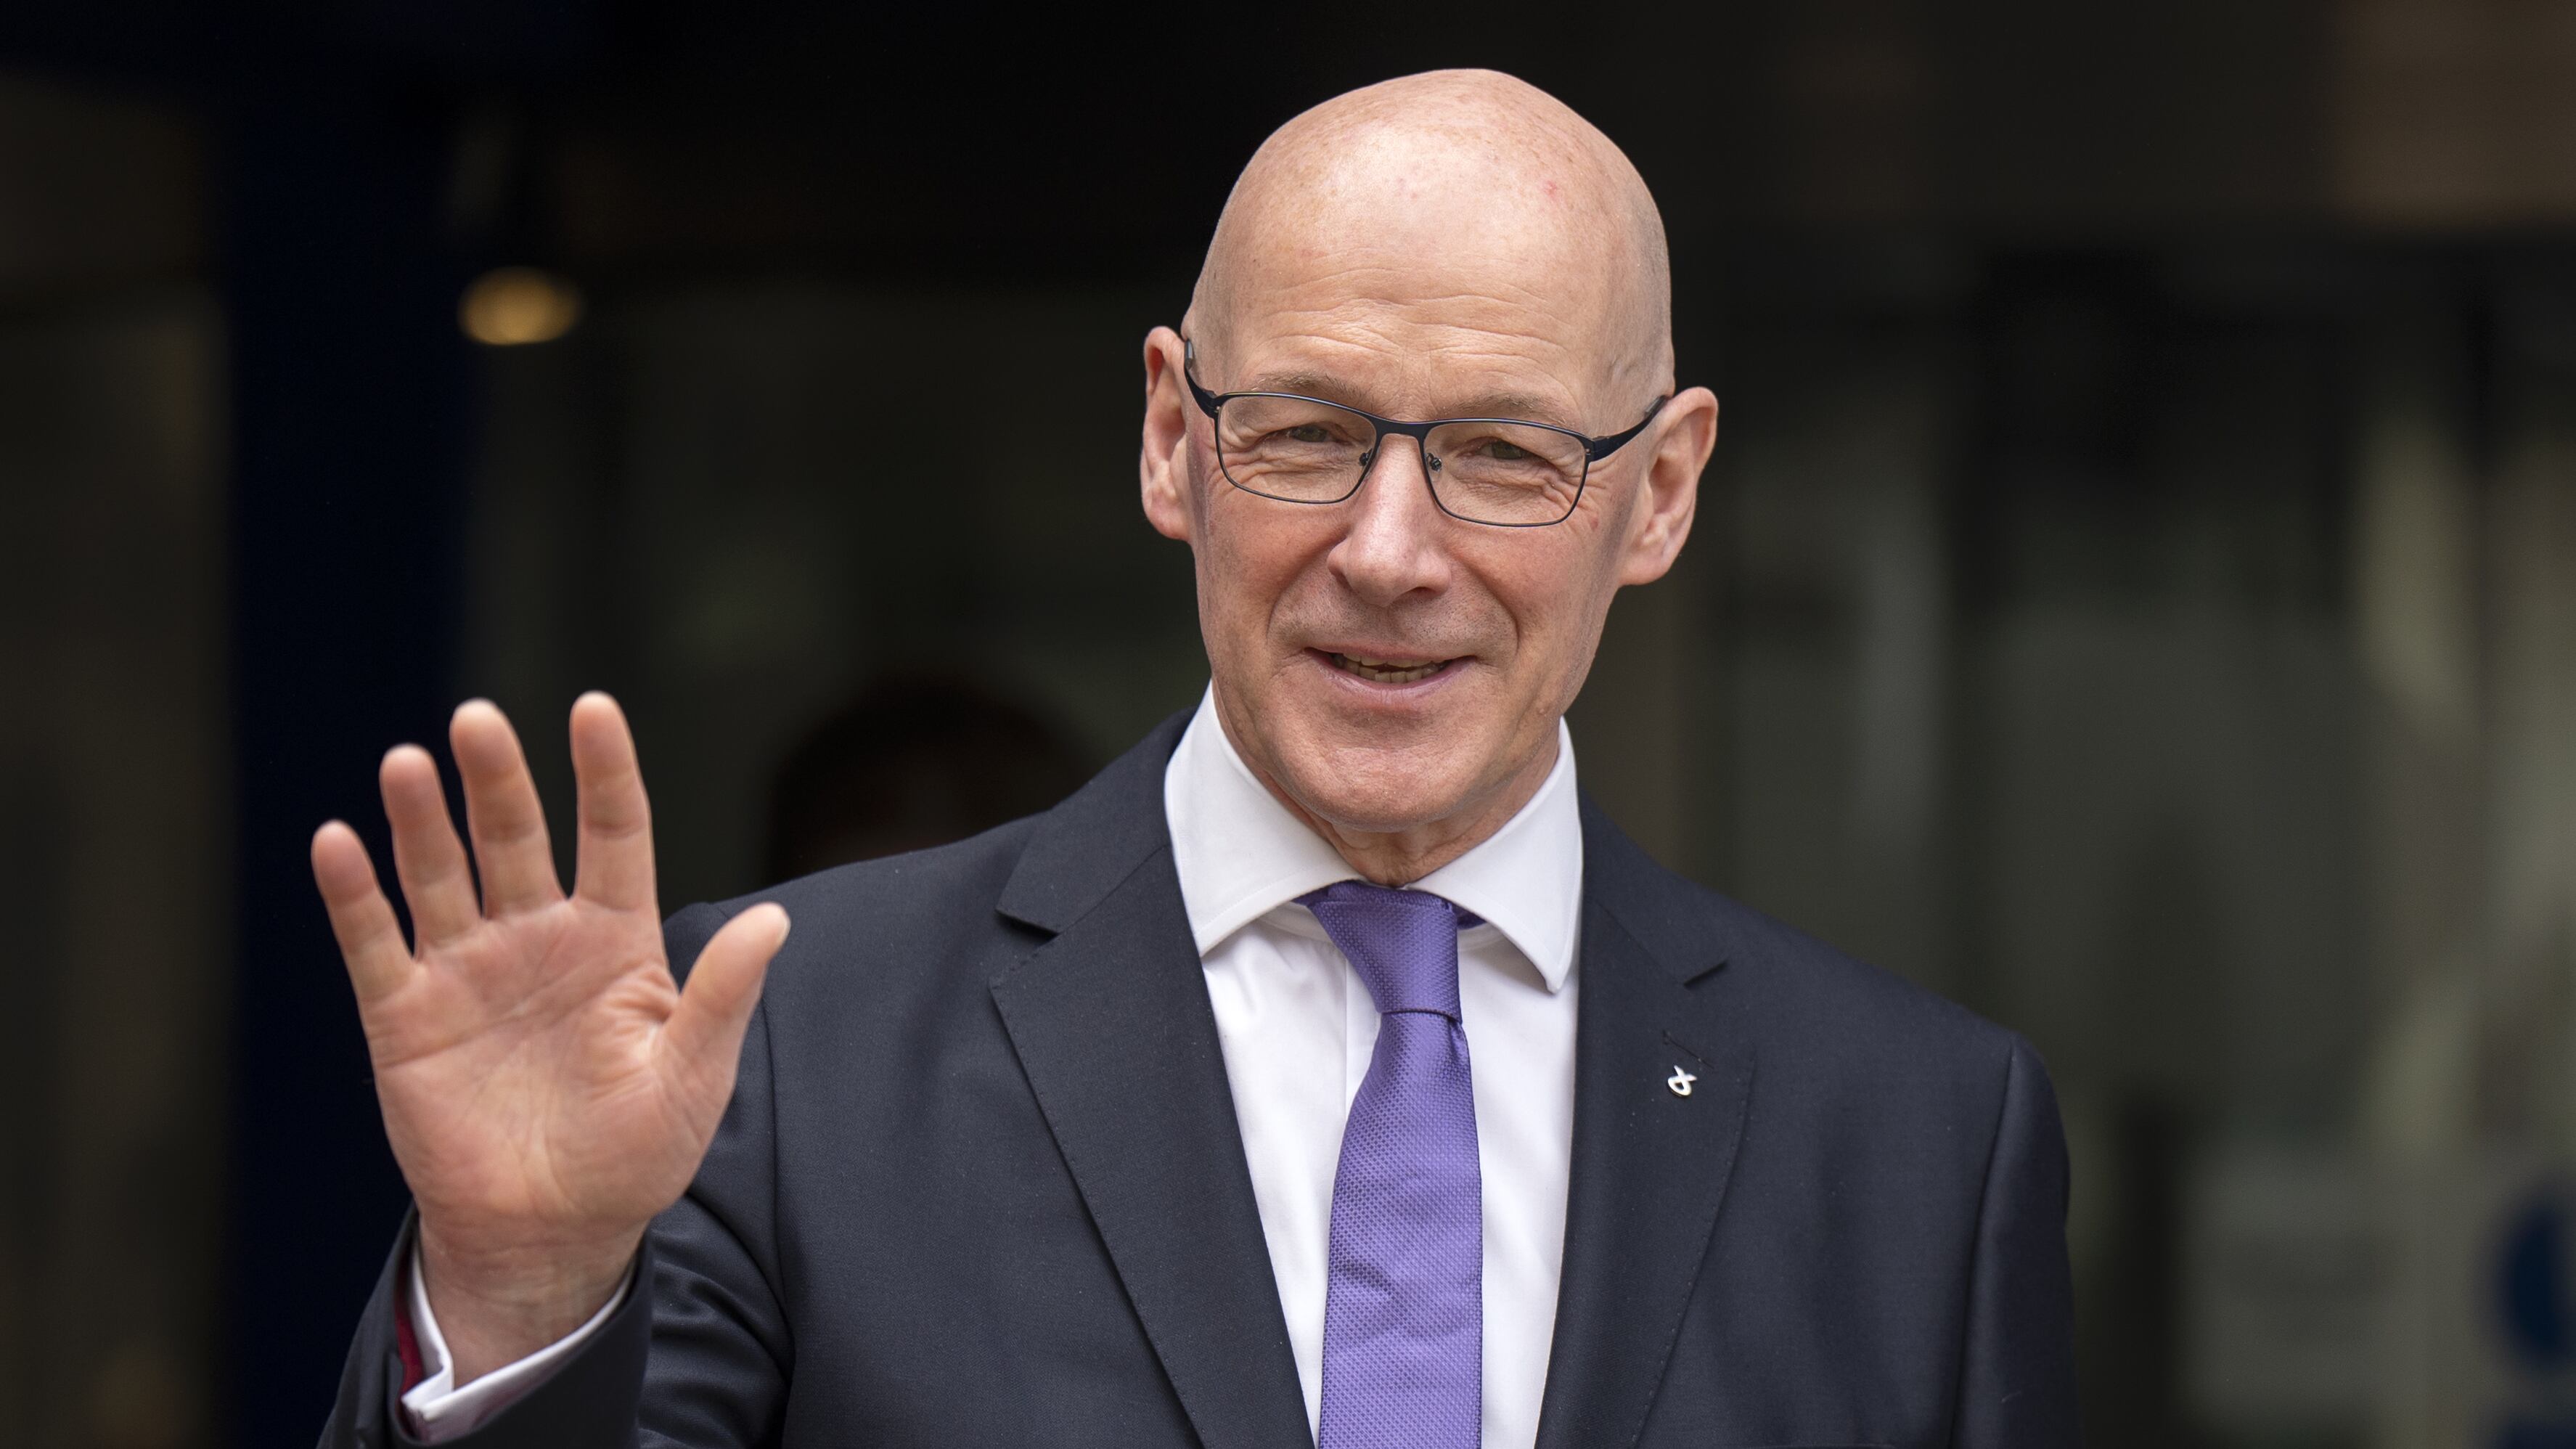 First Minister John Swinney said he is focusing the Scottish Government on key priorities